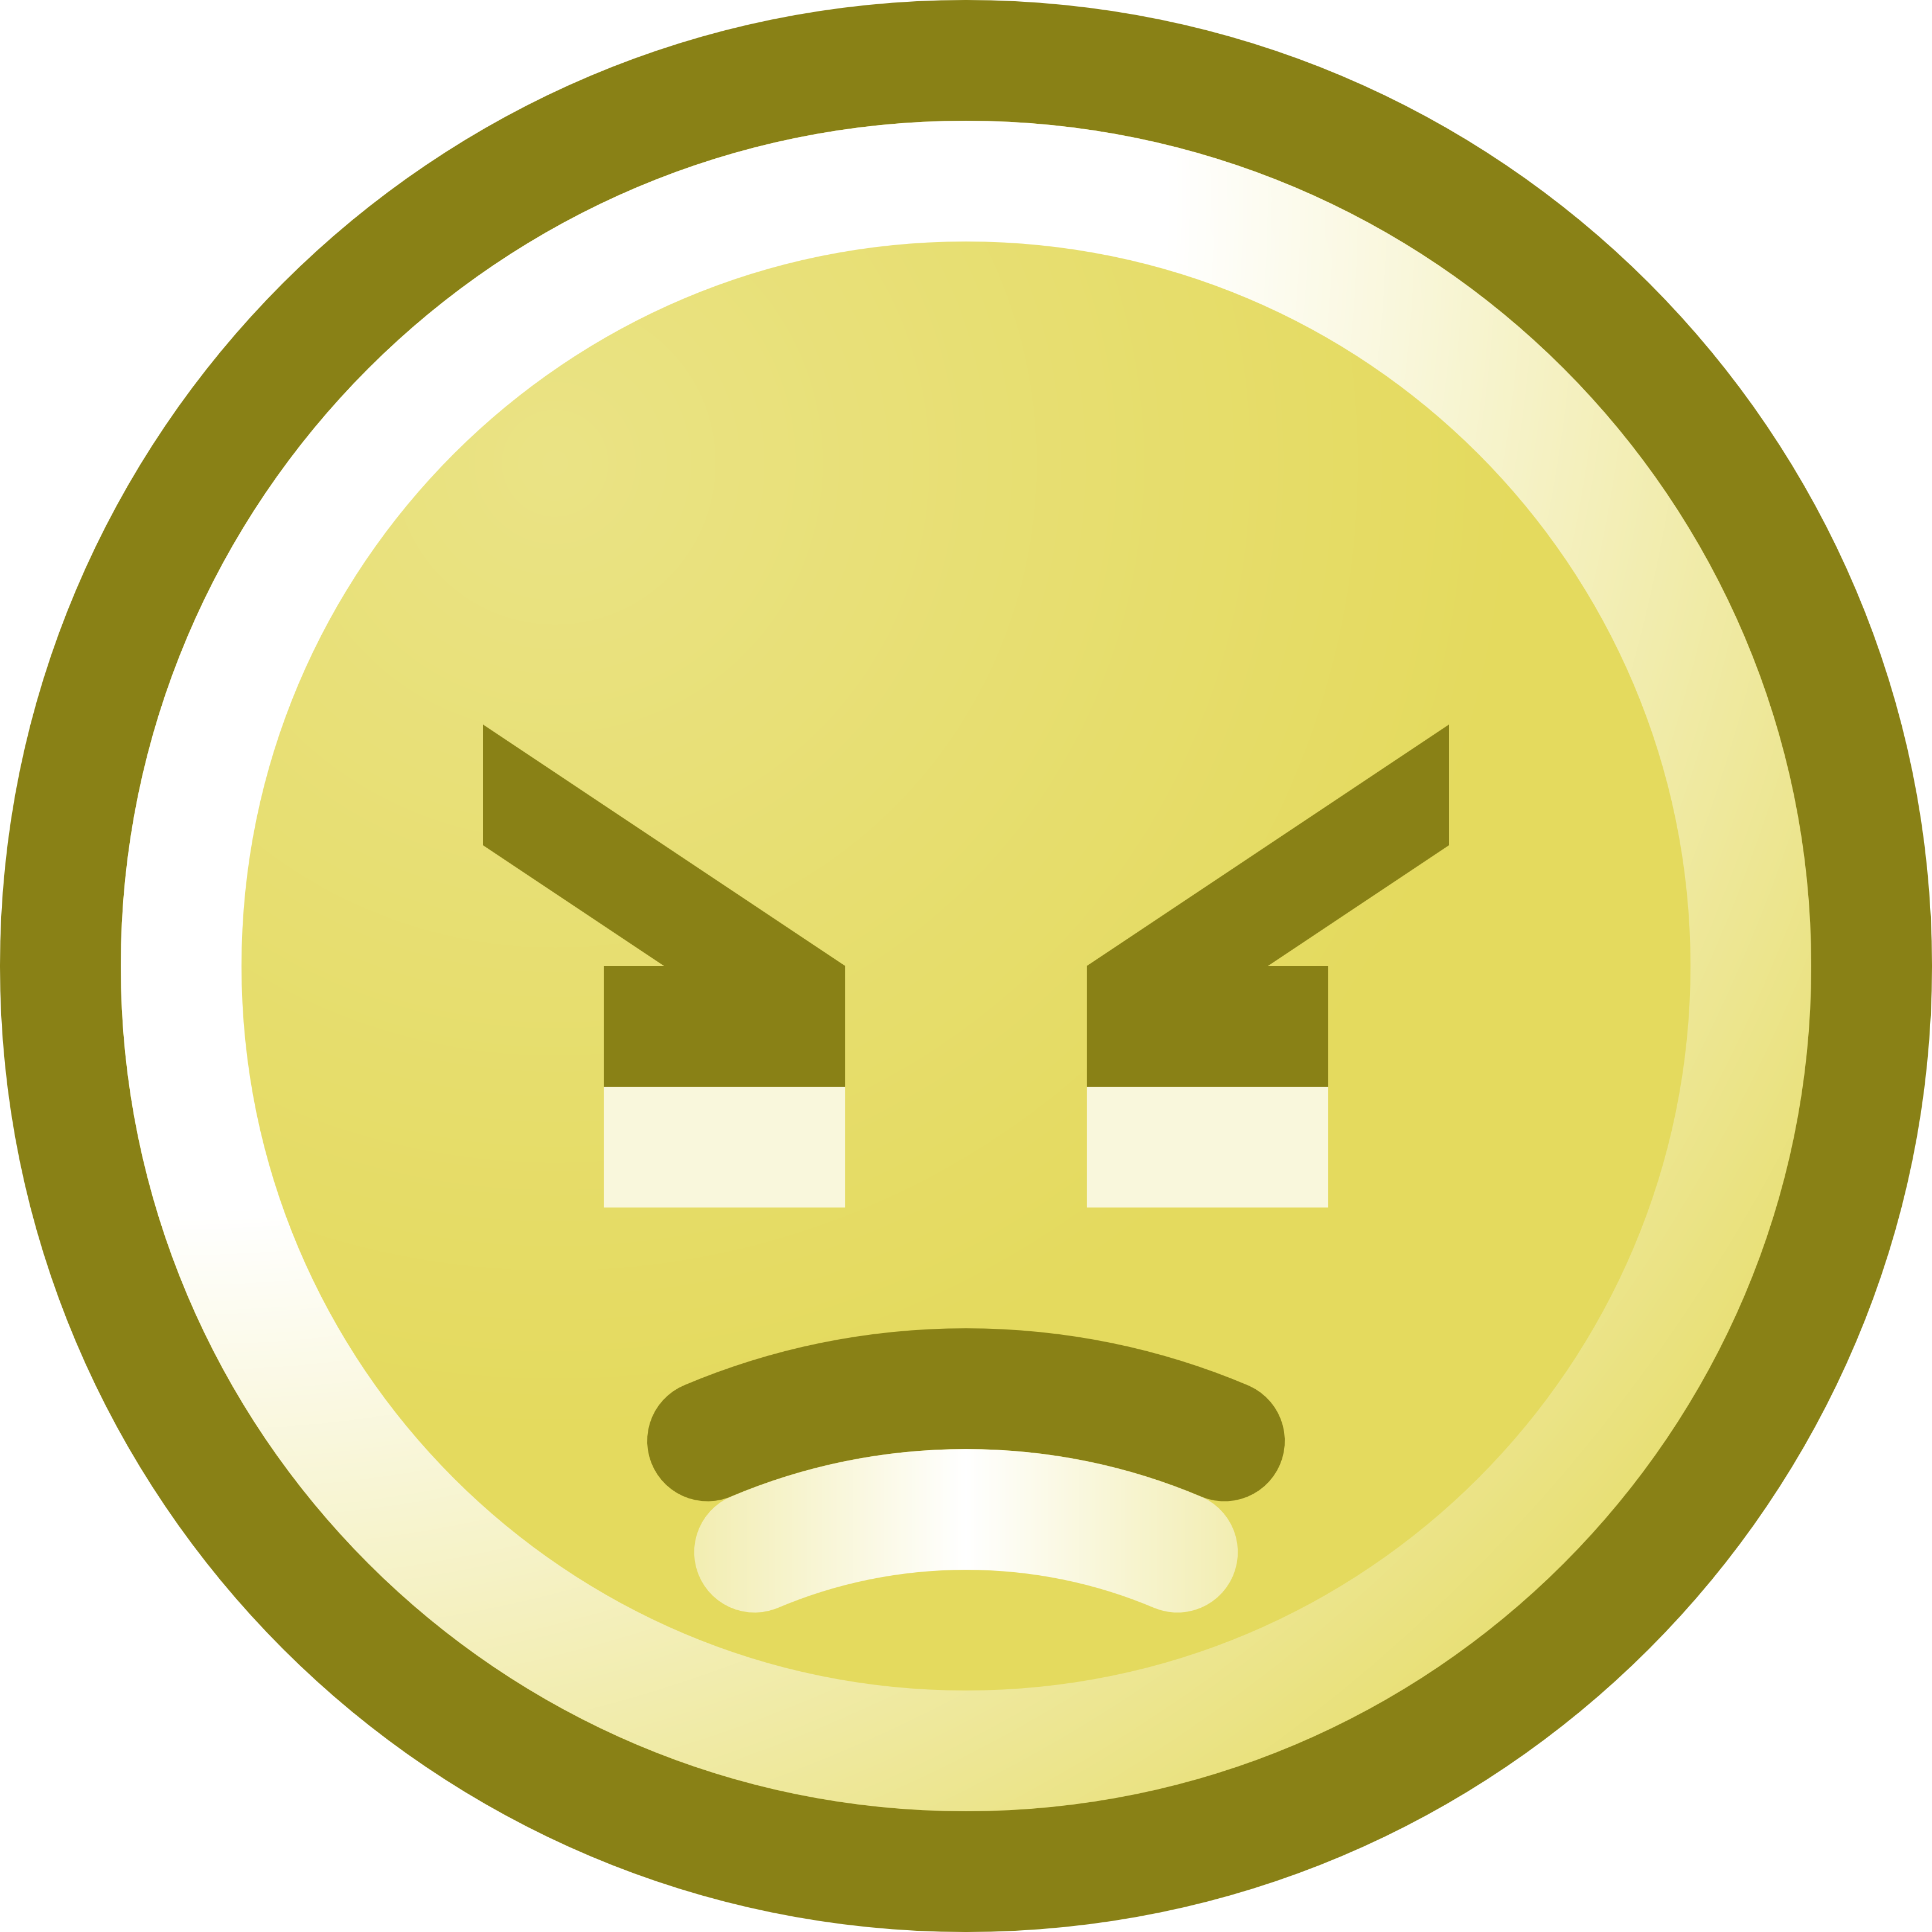 Trollface Clipart - Aggravated Clipart - Png Download (3200x3200), Png Download